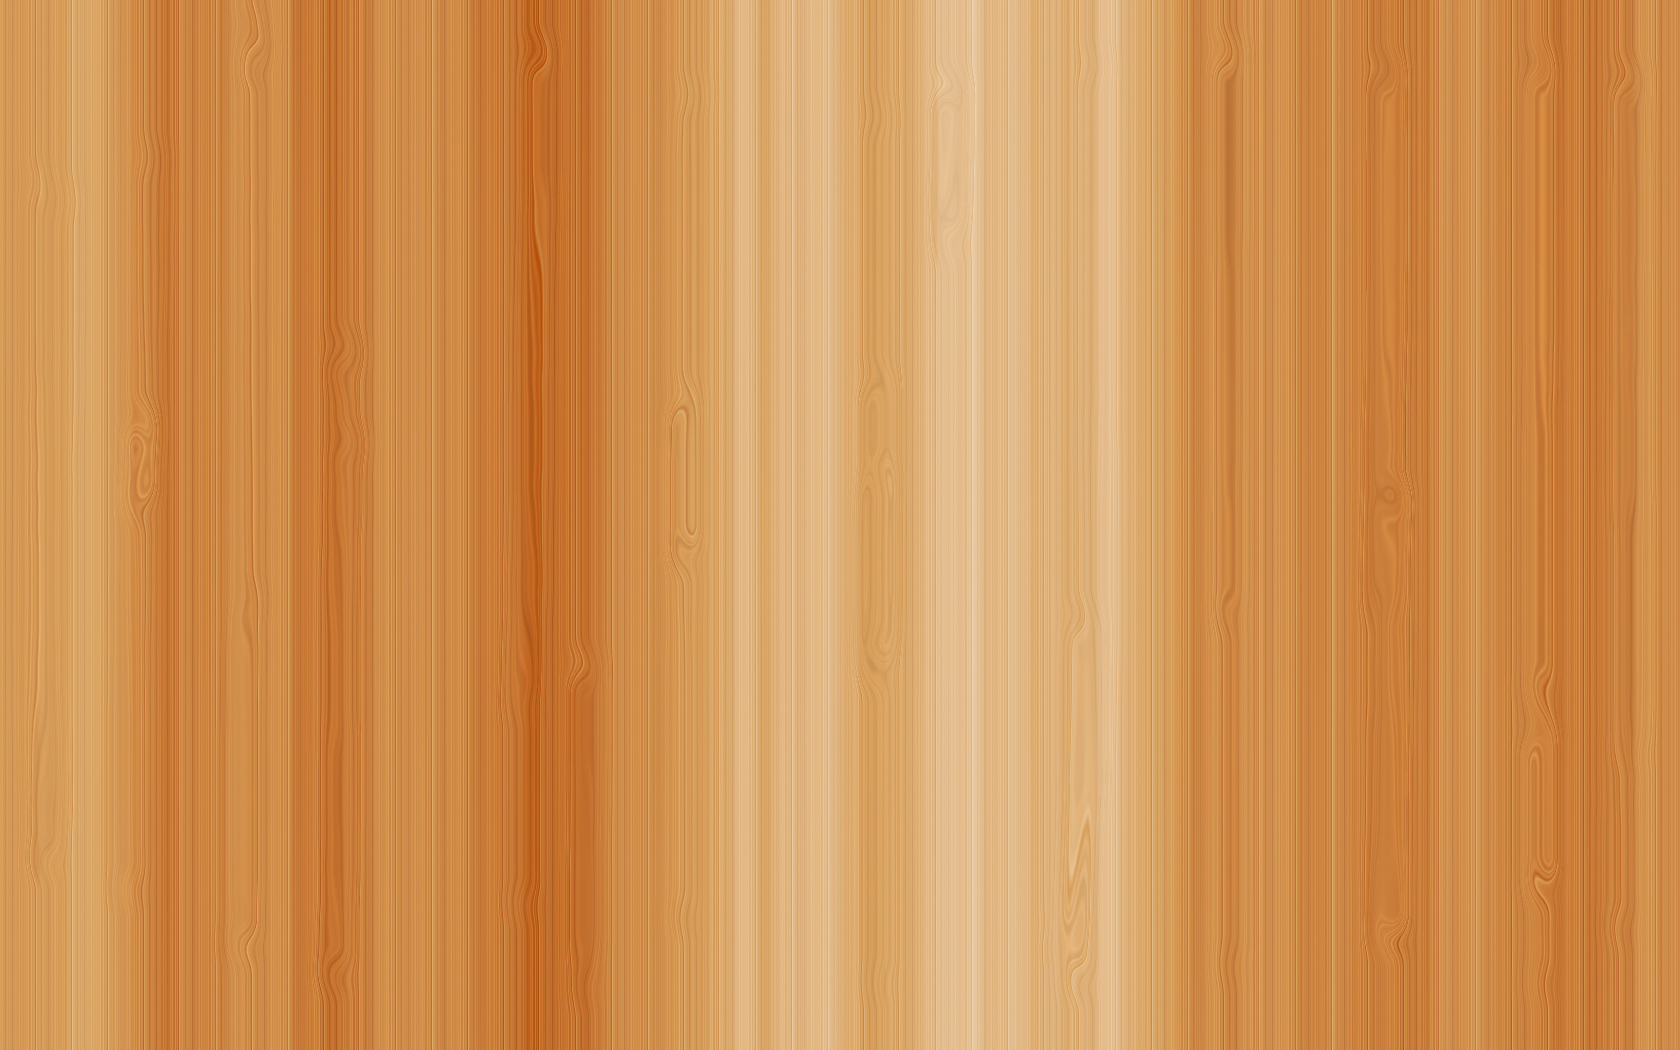 texture wood, download image, photo, tree wood, wood texture, background